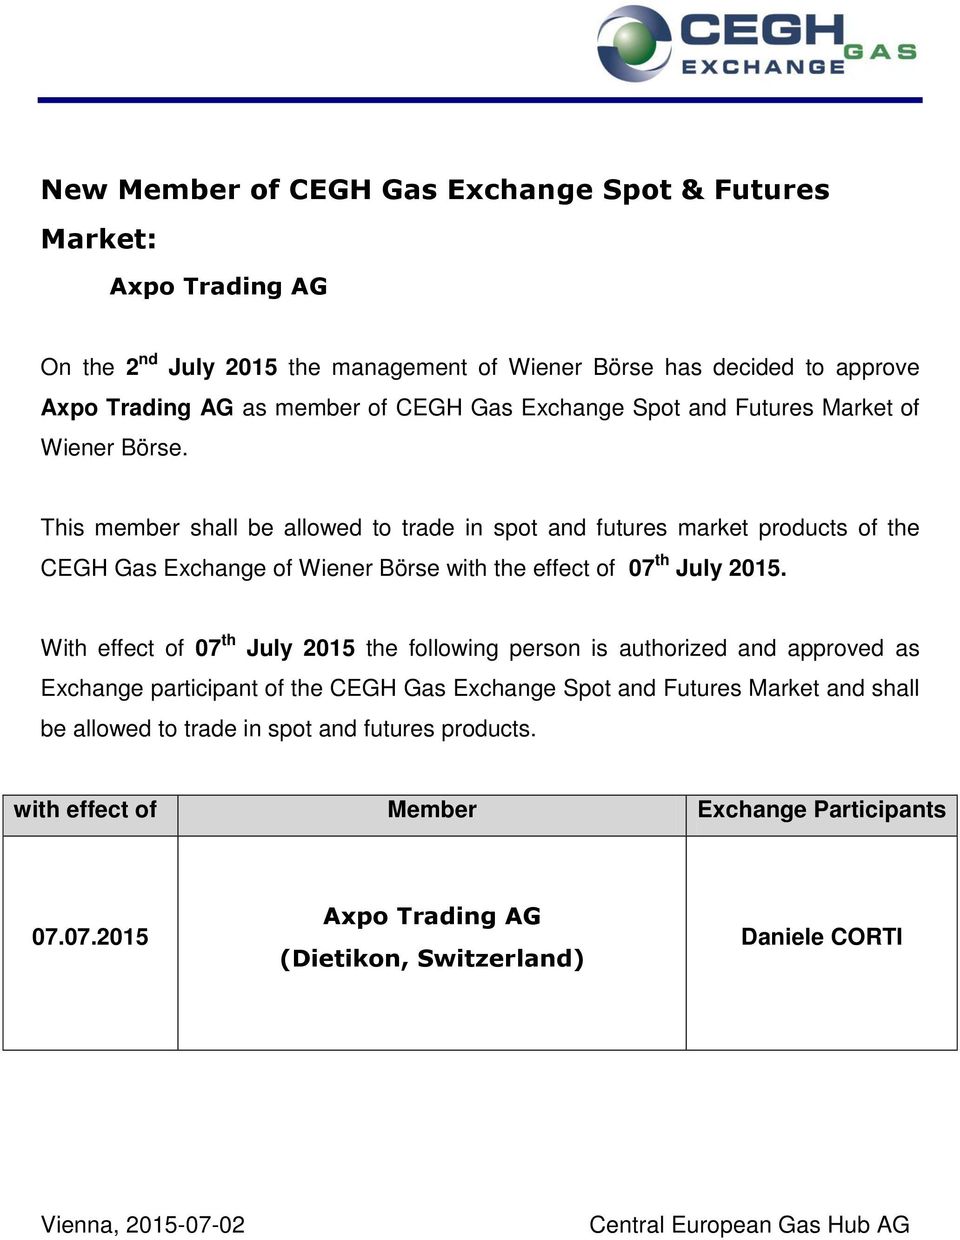 This member shall be allowed to trade in spot and futures market products of the CEGH Gas Exchange of Wiener Börse with the effect of 07 th July 2015.